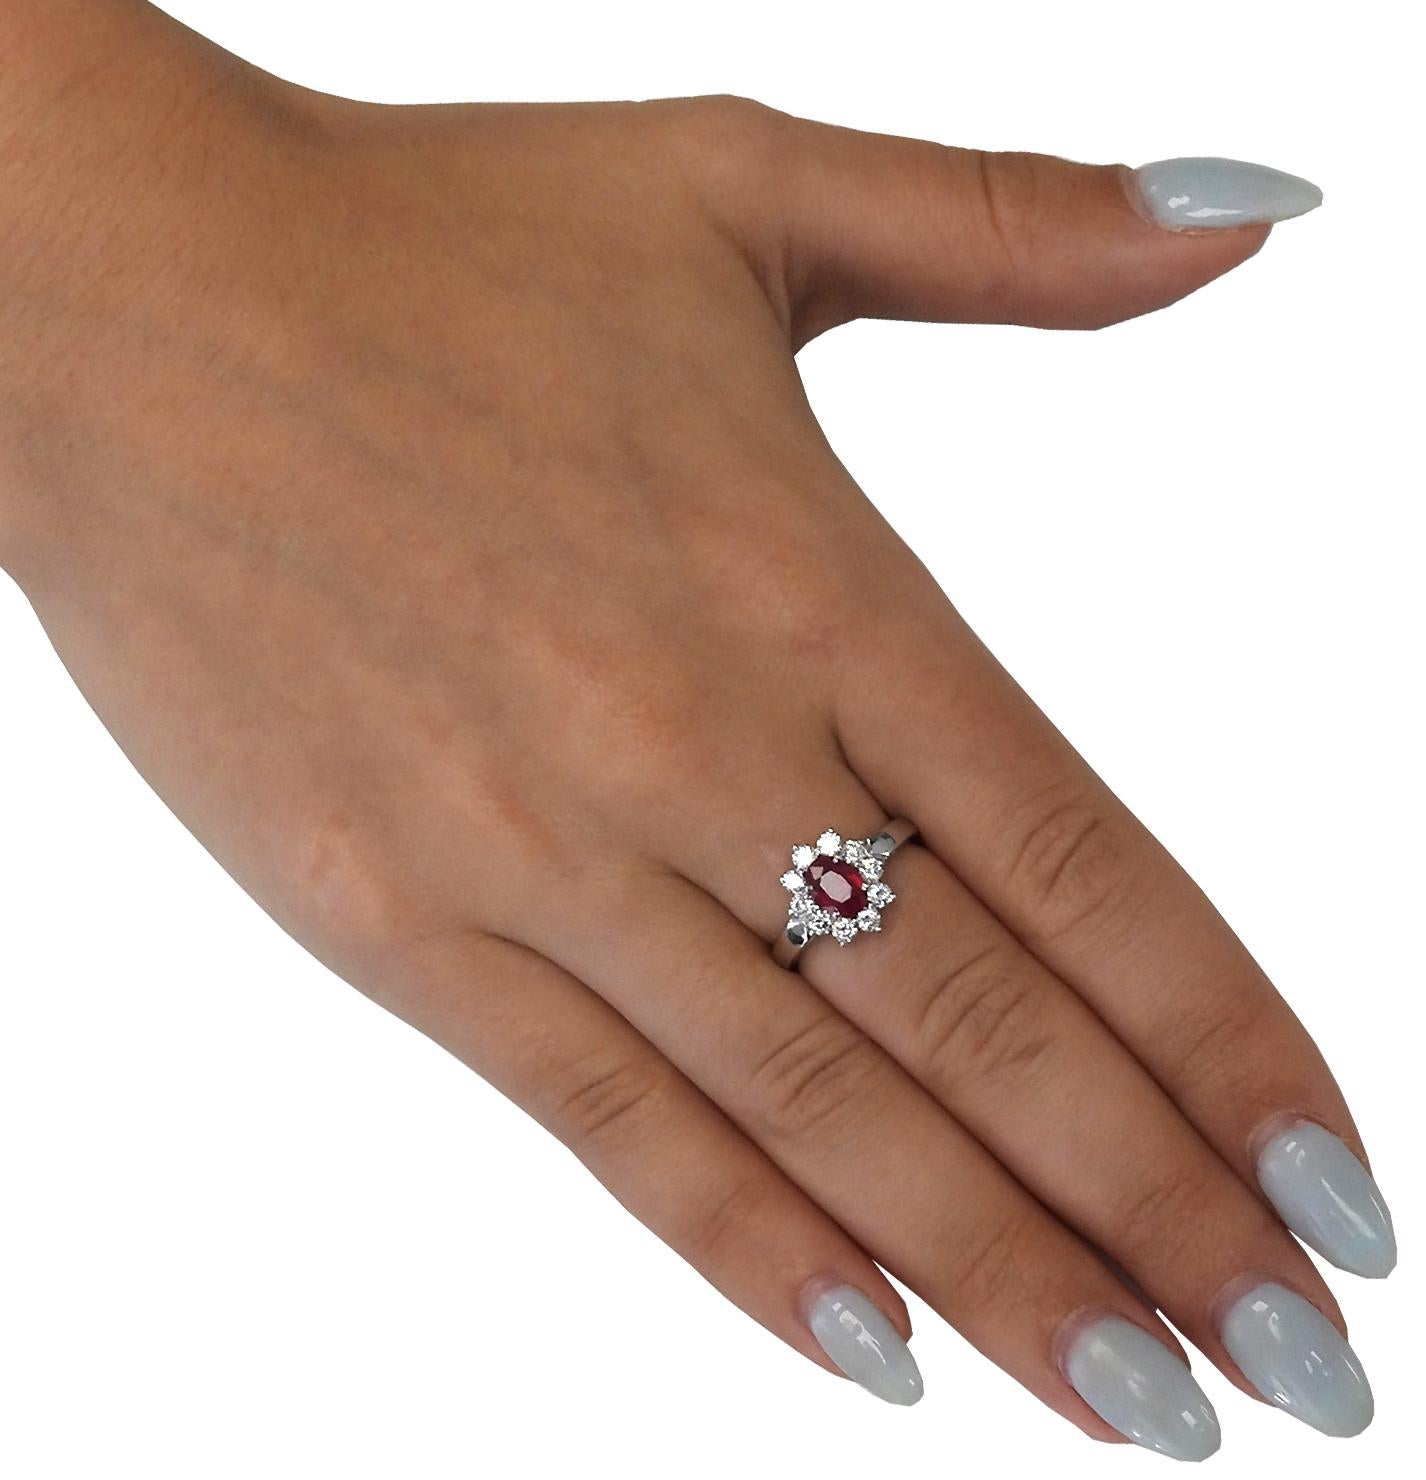 Sensational Vivid Diamonds ring finely crafted by hand in platinum, featuring an oval cut Burma Ruby weighing 0.89 carats total accompanied by 10 round brilliant cut diamonds weighing approximately 0.68 carats total, F color, VS clarity, seamlessly